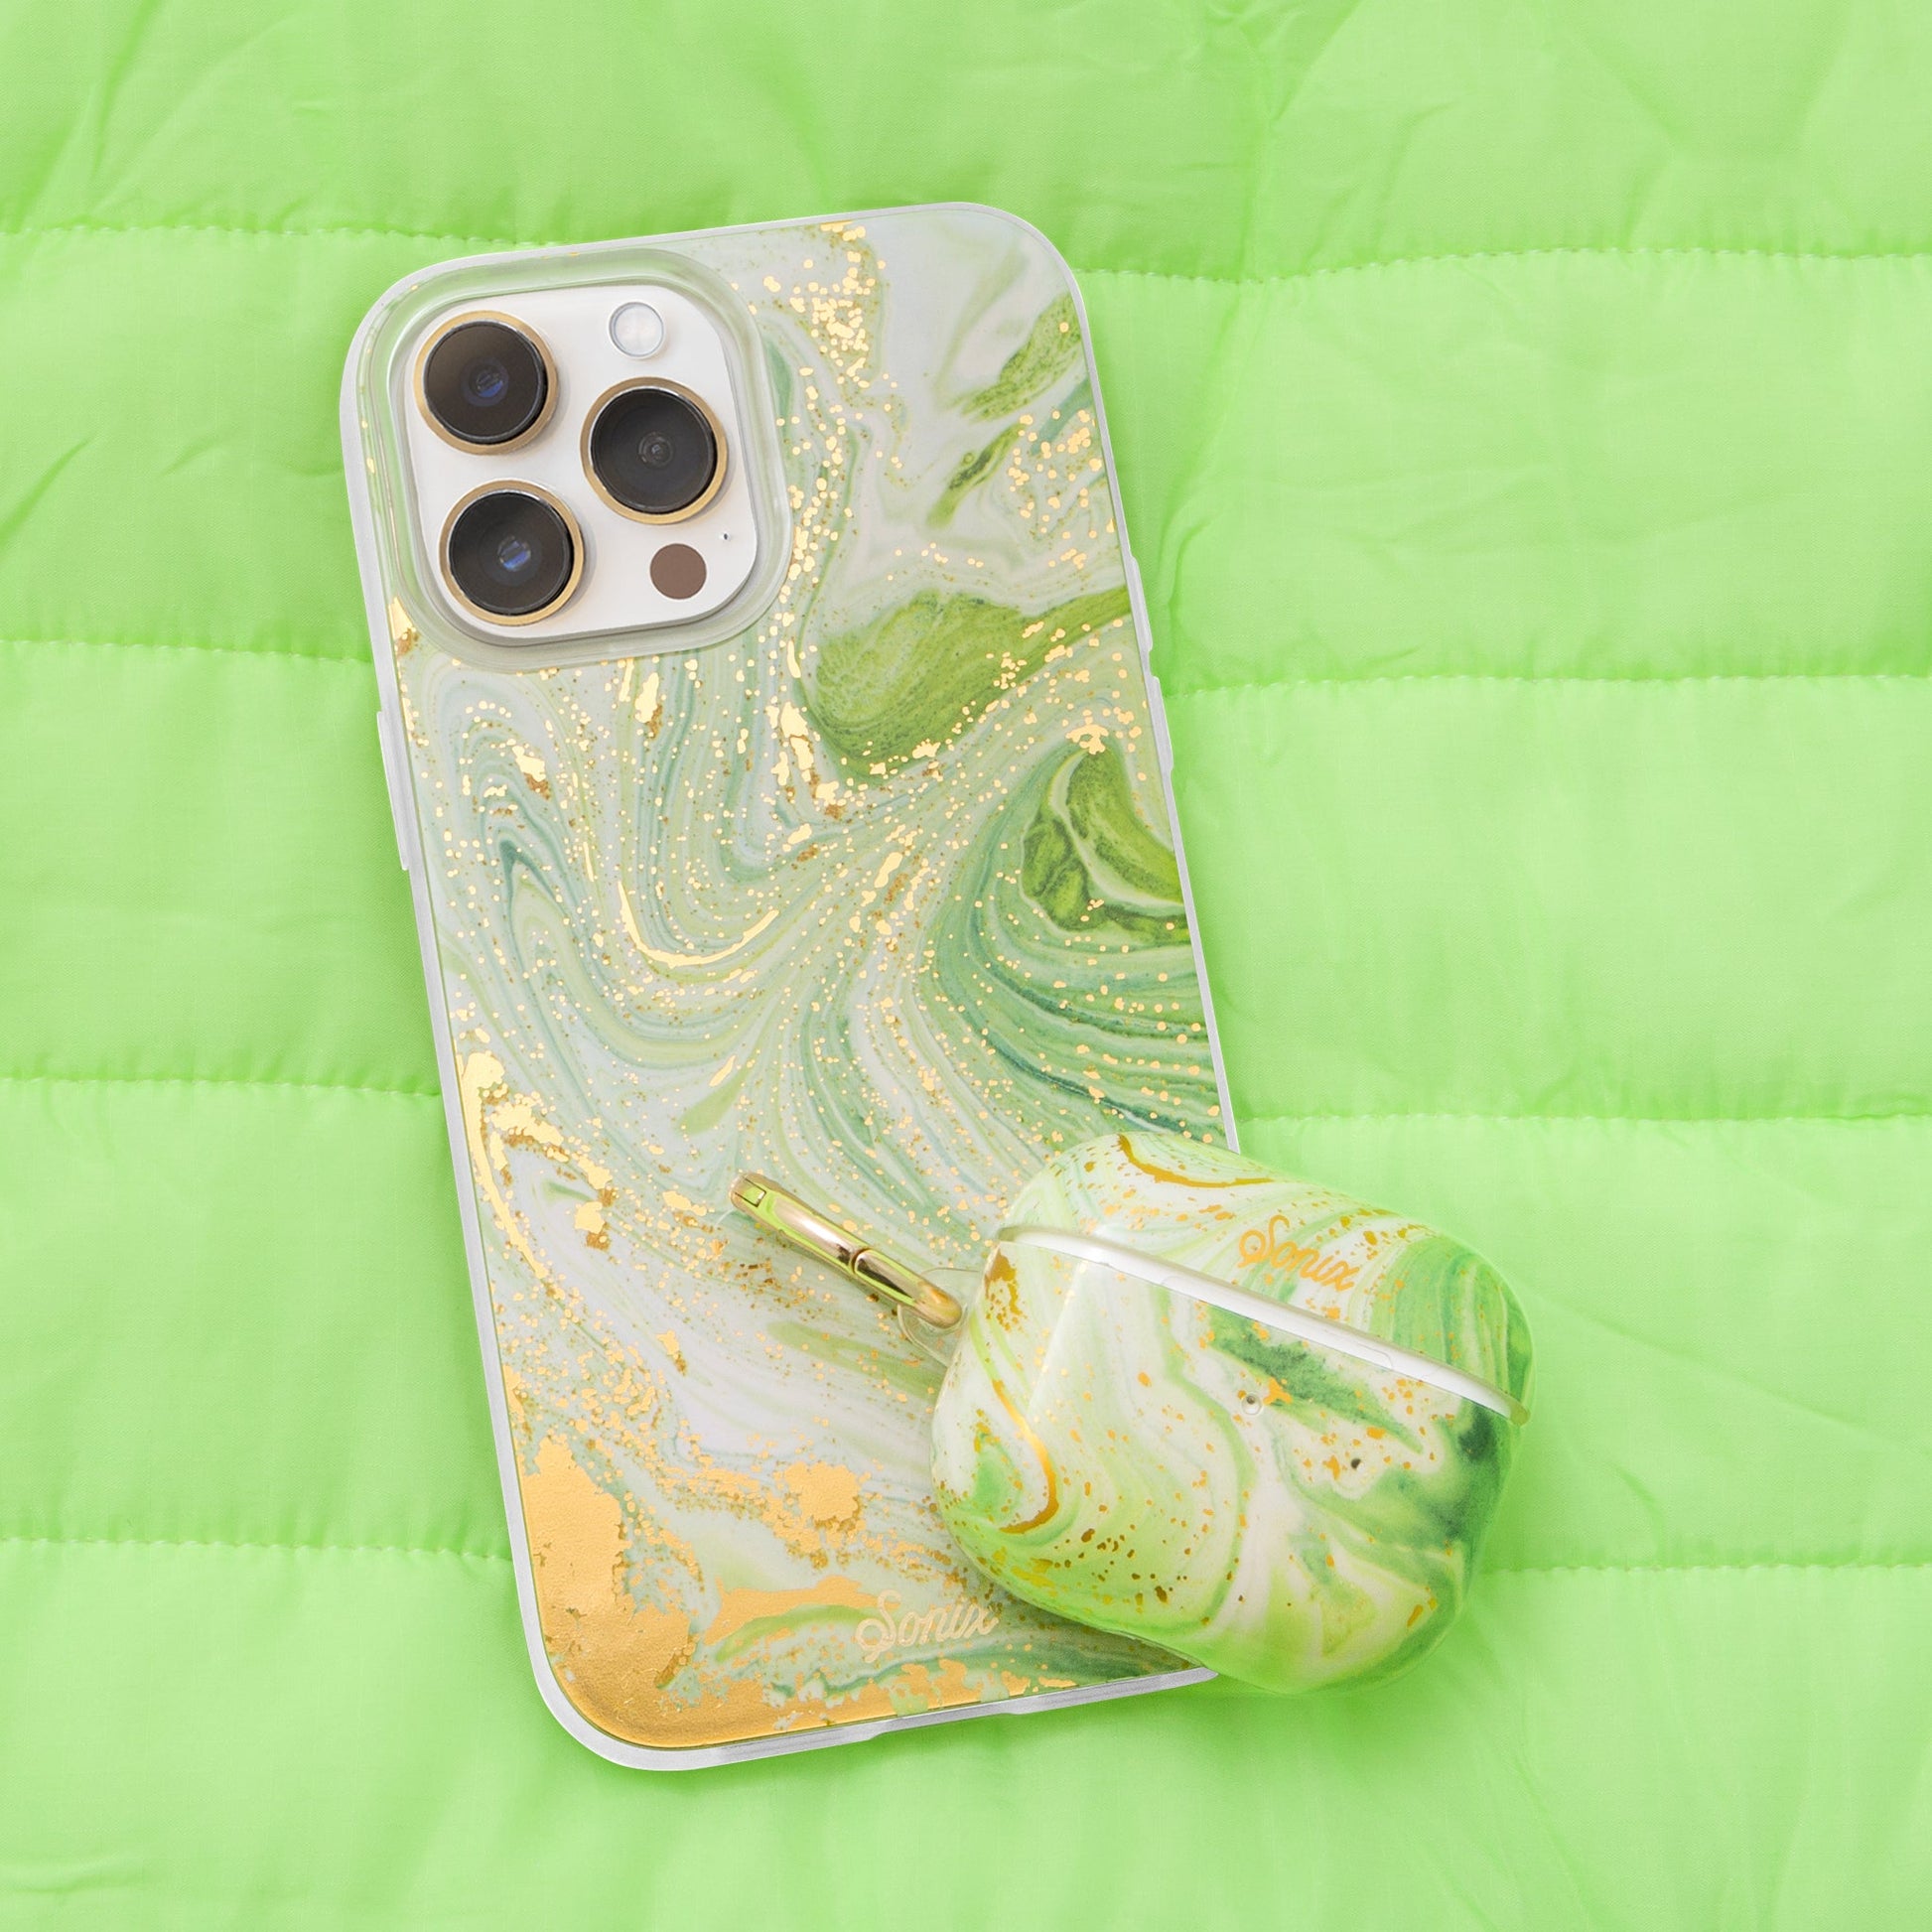 jade green marbled design with gold shimmer detailing shown on an iphone 12 and airpod case